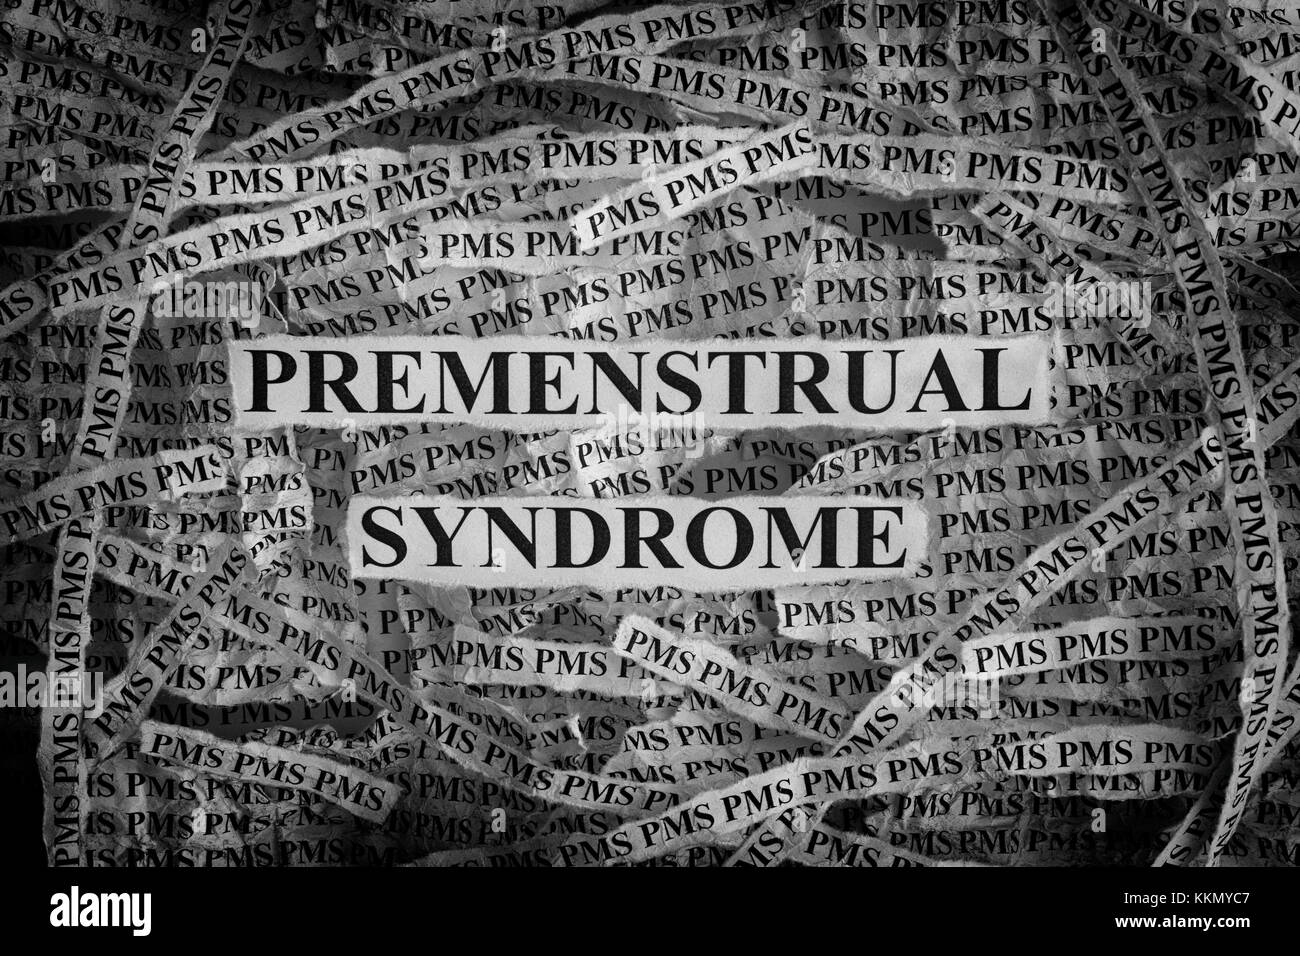 Premenstrual Syndrome. Torn pieces of paper with words Premenstrual Syndrome. Concept Image. Black and White. Closeup. Stock Photo